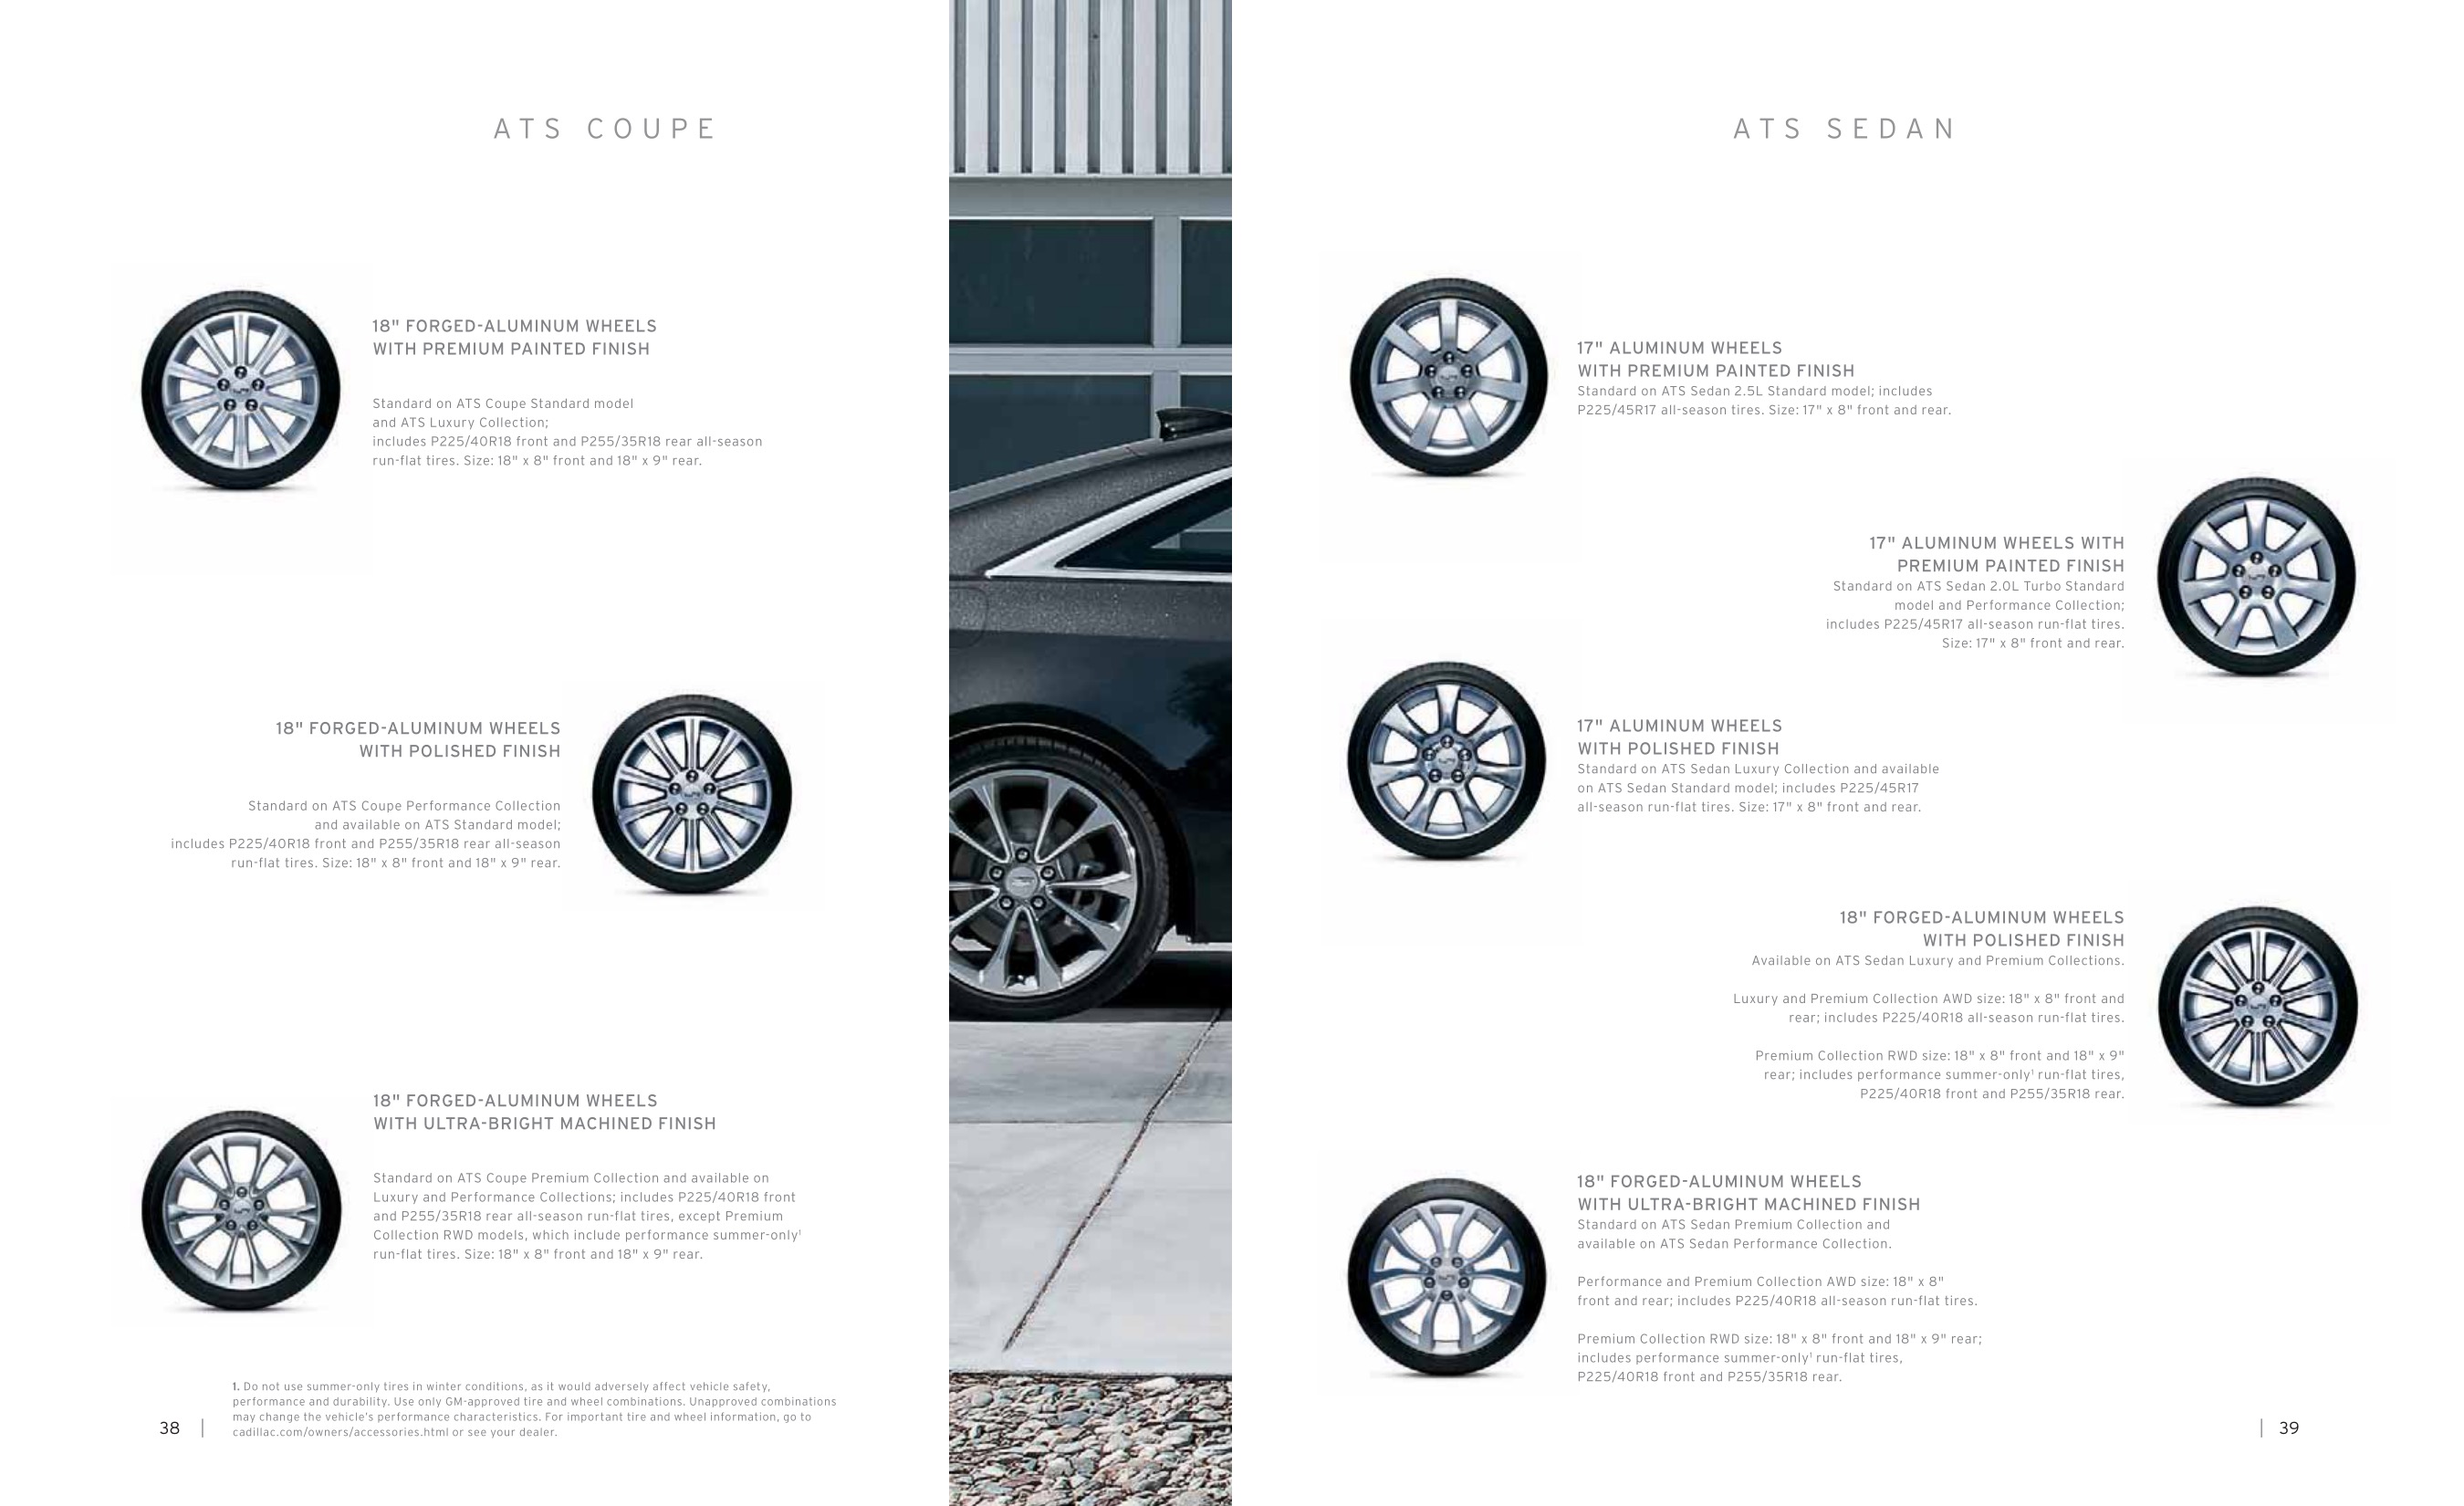 2015 Cadillac ATS Coupe Brochure Page 16